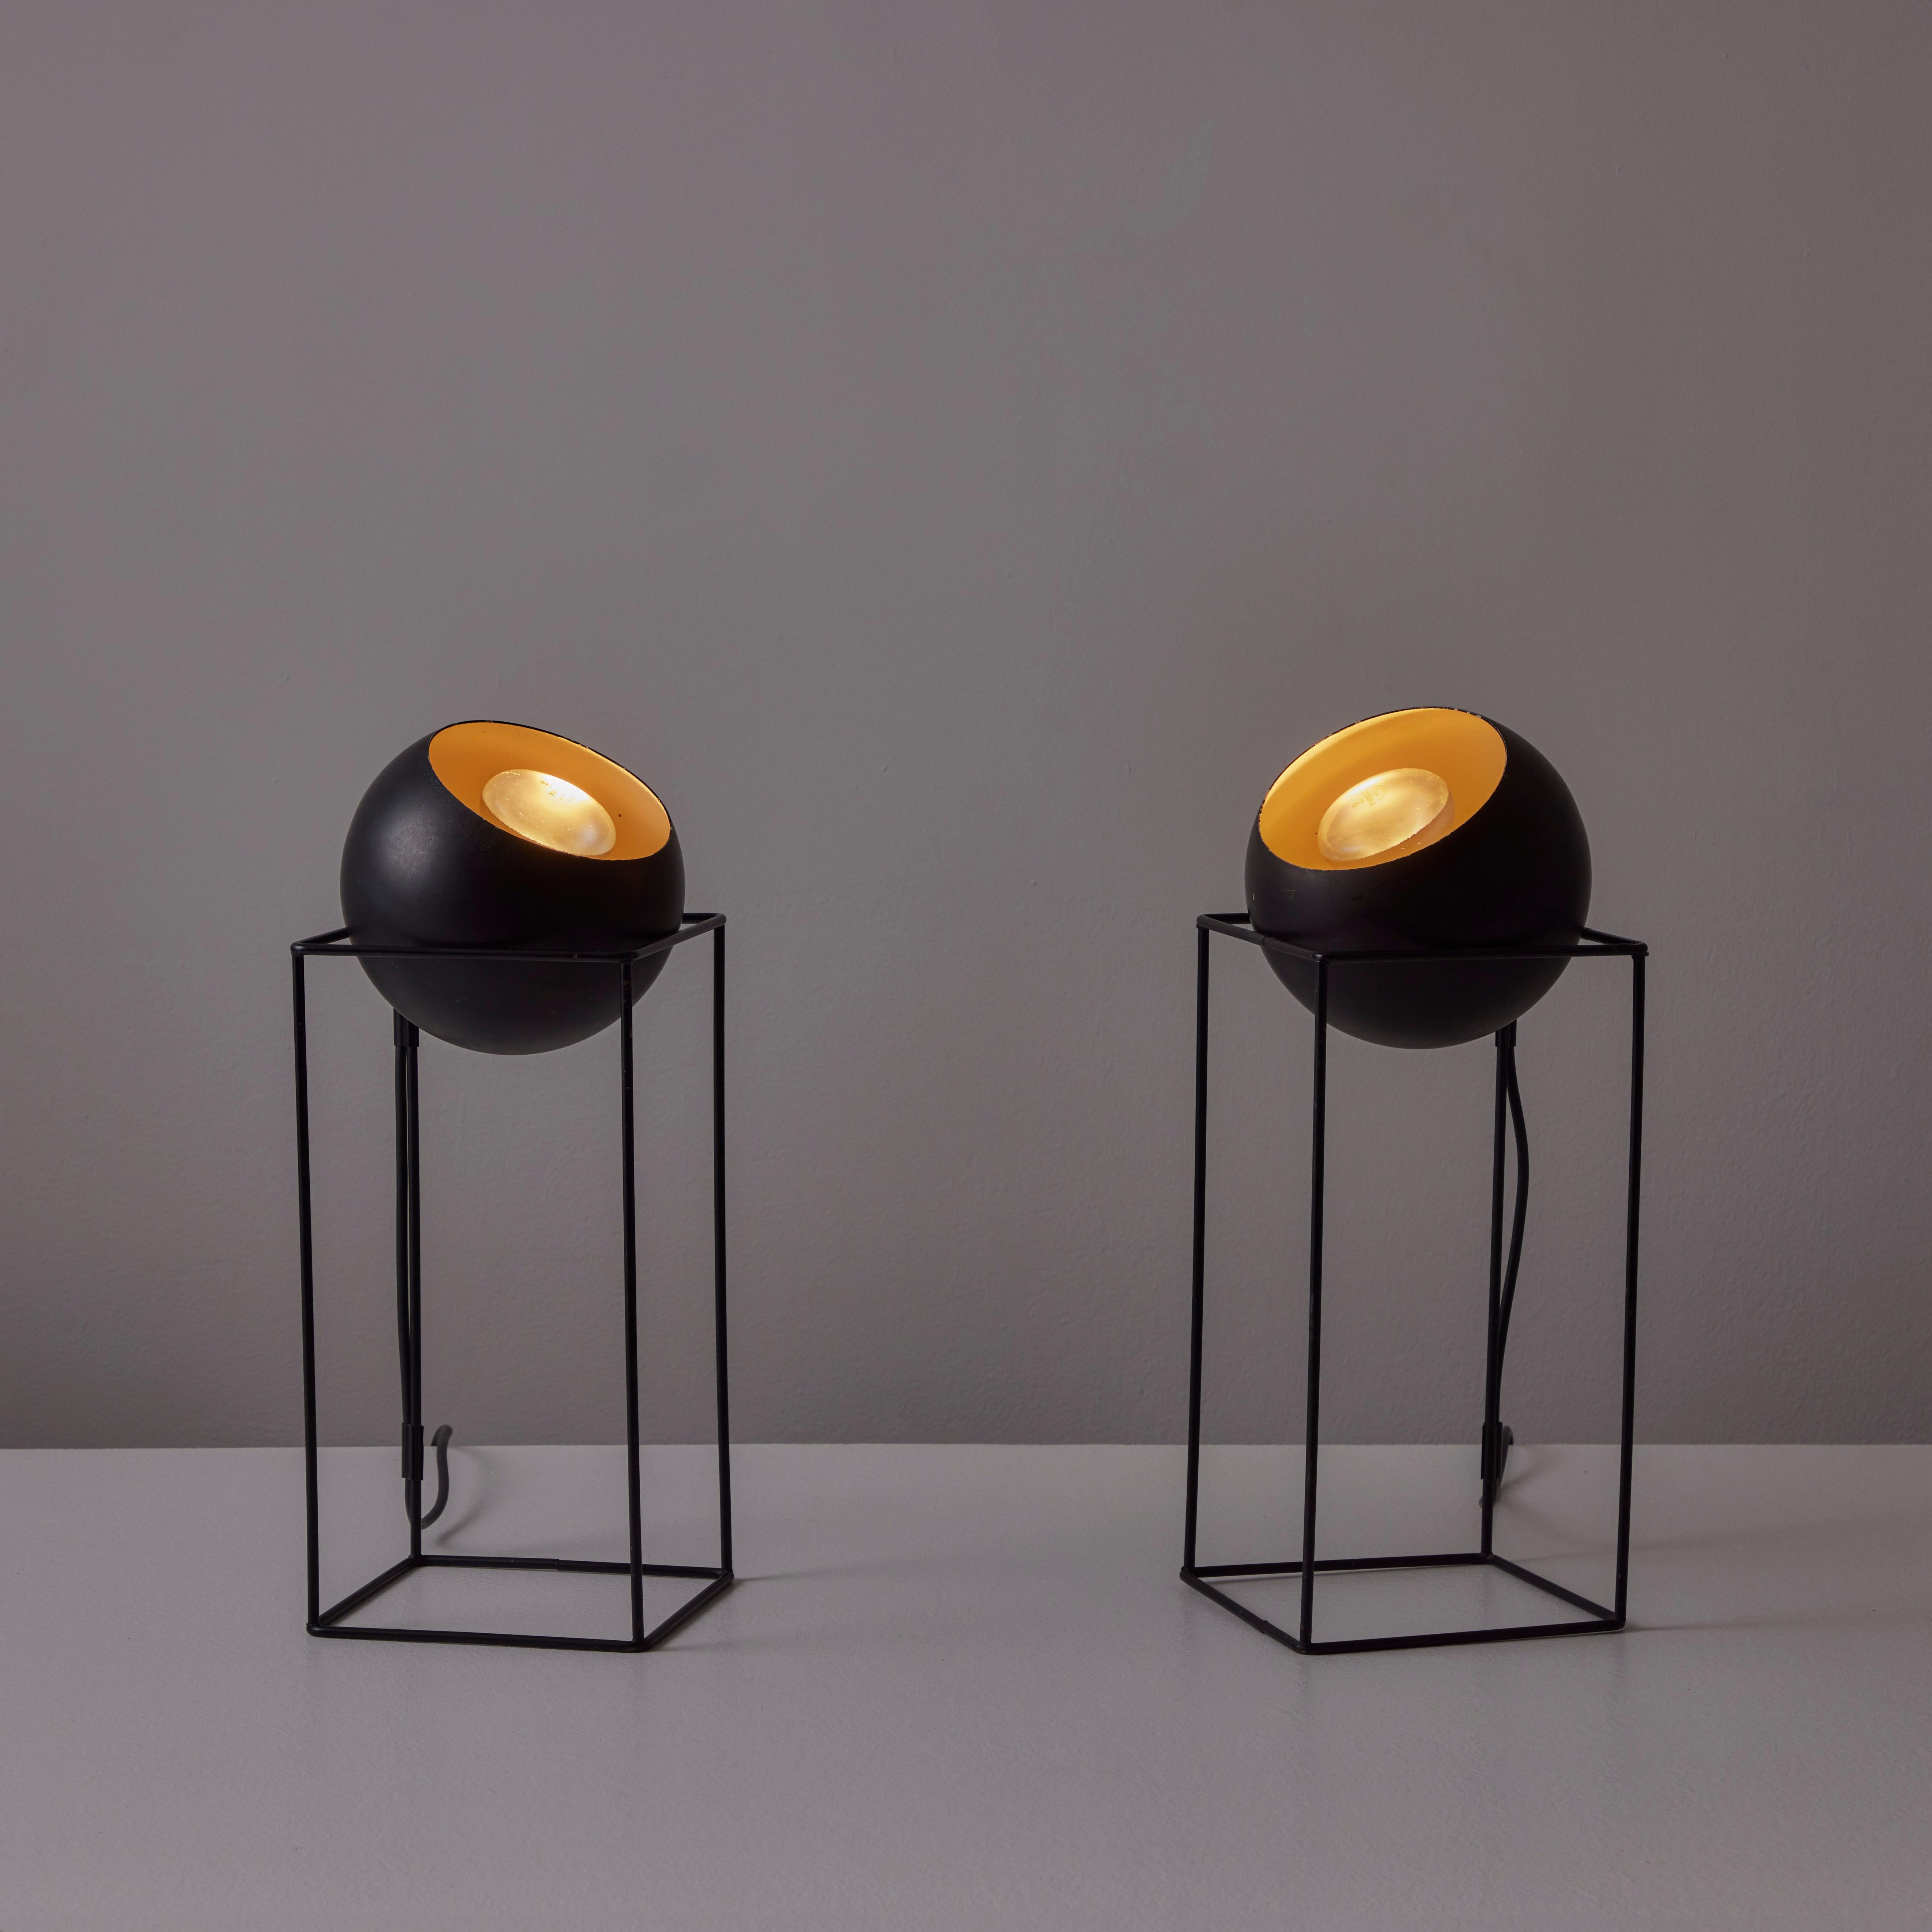 Pair of Table Lamps by Raymor. Designed and manufactured in the USA, circa the 1950s. Enameled steel rodded frames and moveable ball shades. The ball shades can be handled to move the direction of the light. Each lamp holds an E26 socket type. We